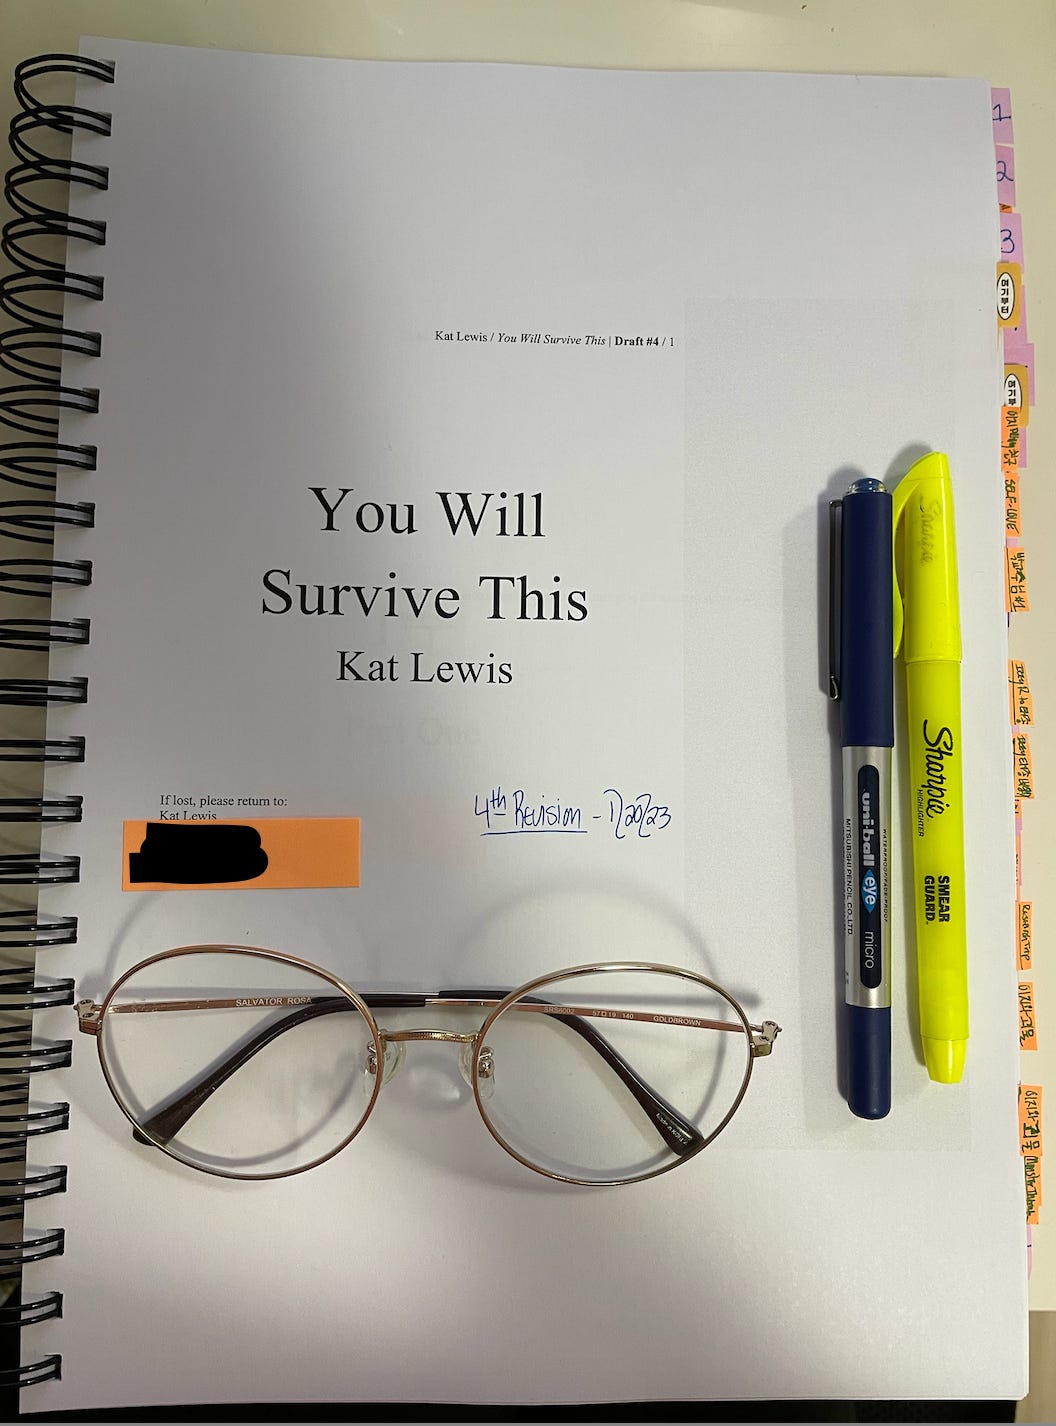 A photo of Kat’s printed manuscript for You Will Survive This. The manuscript is turned to the titled page. Tabs of various colors along the side of the print out indicate chapter numbers and revision notes. The notes are written in both English and Korean.